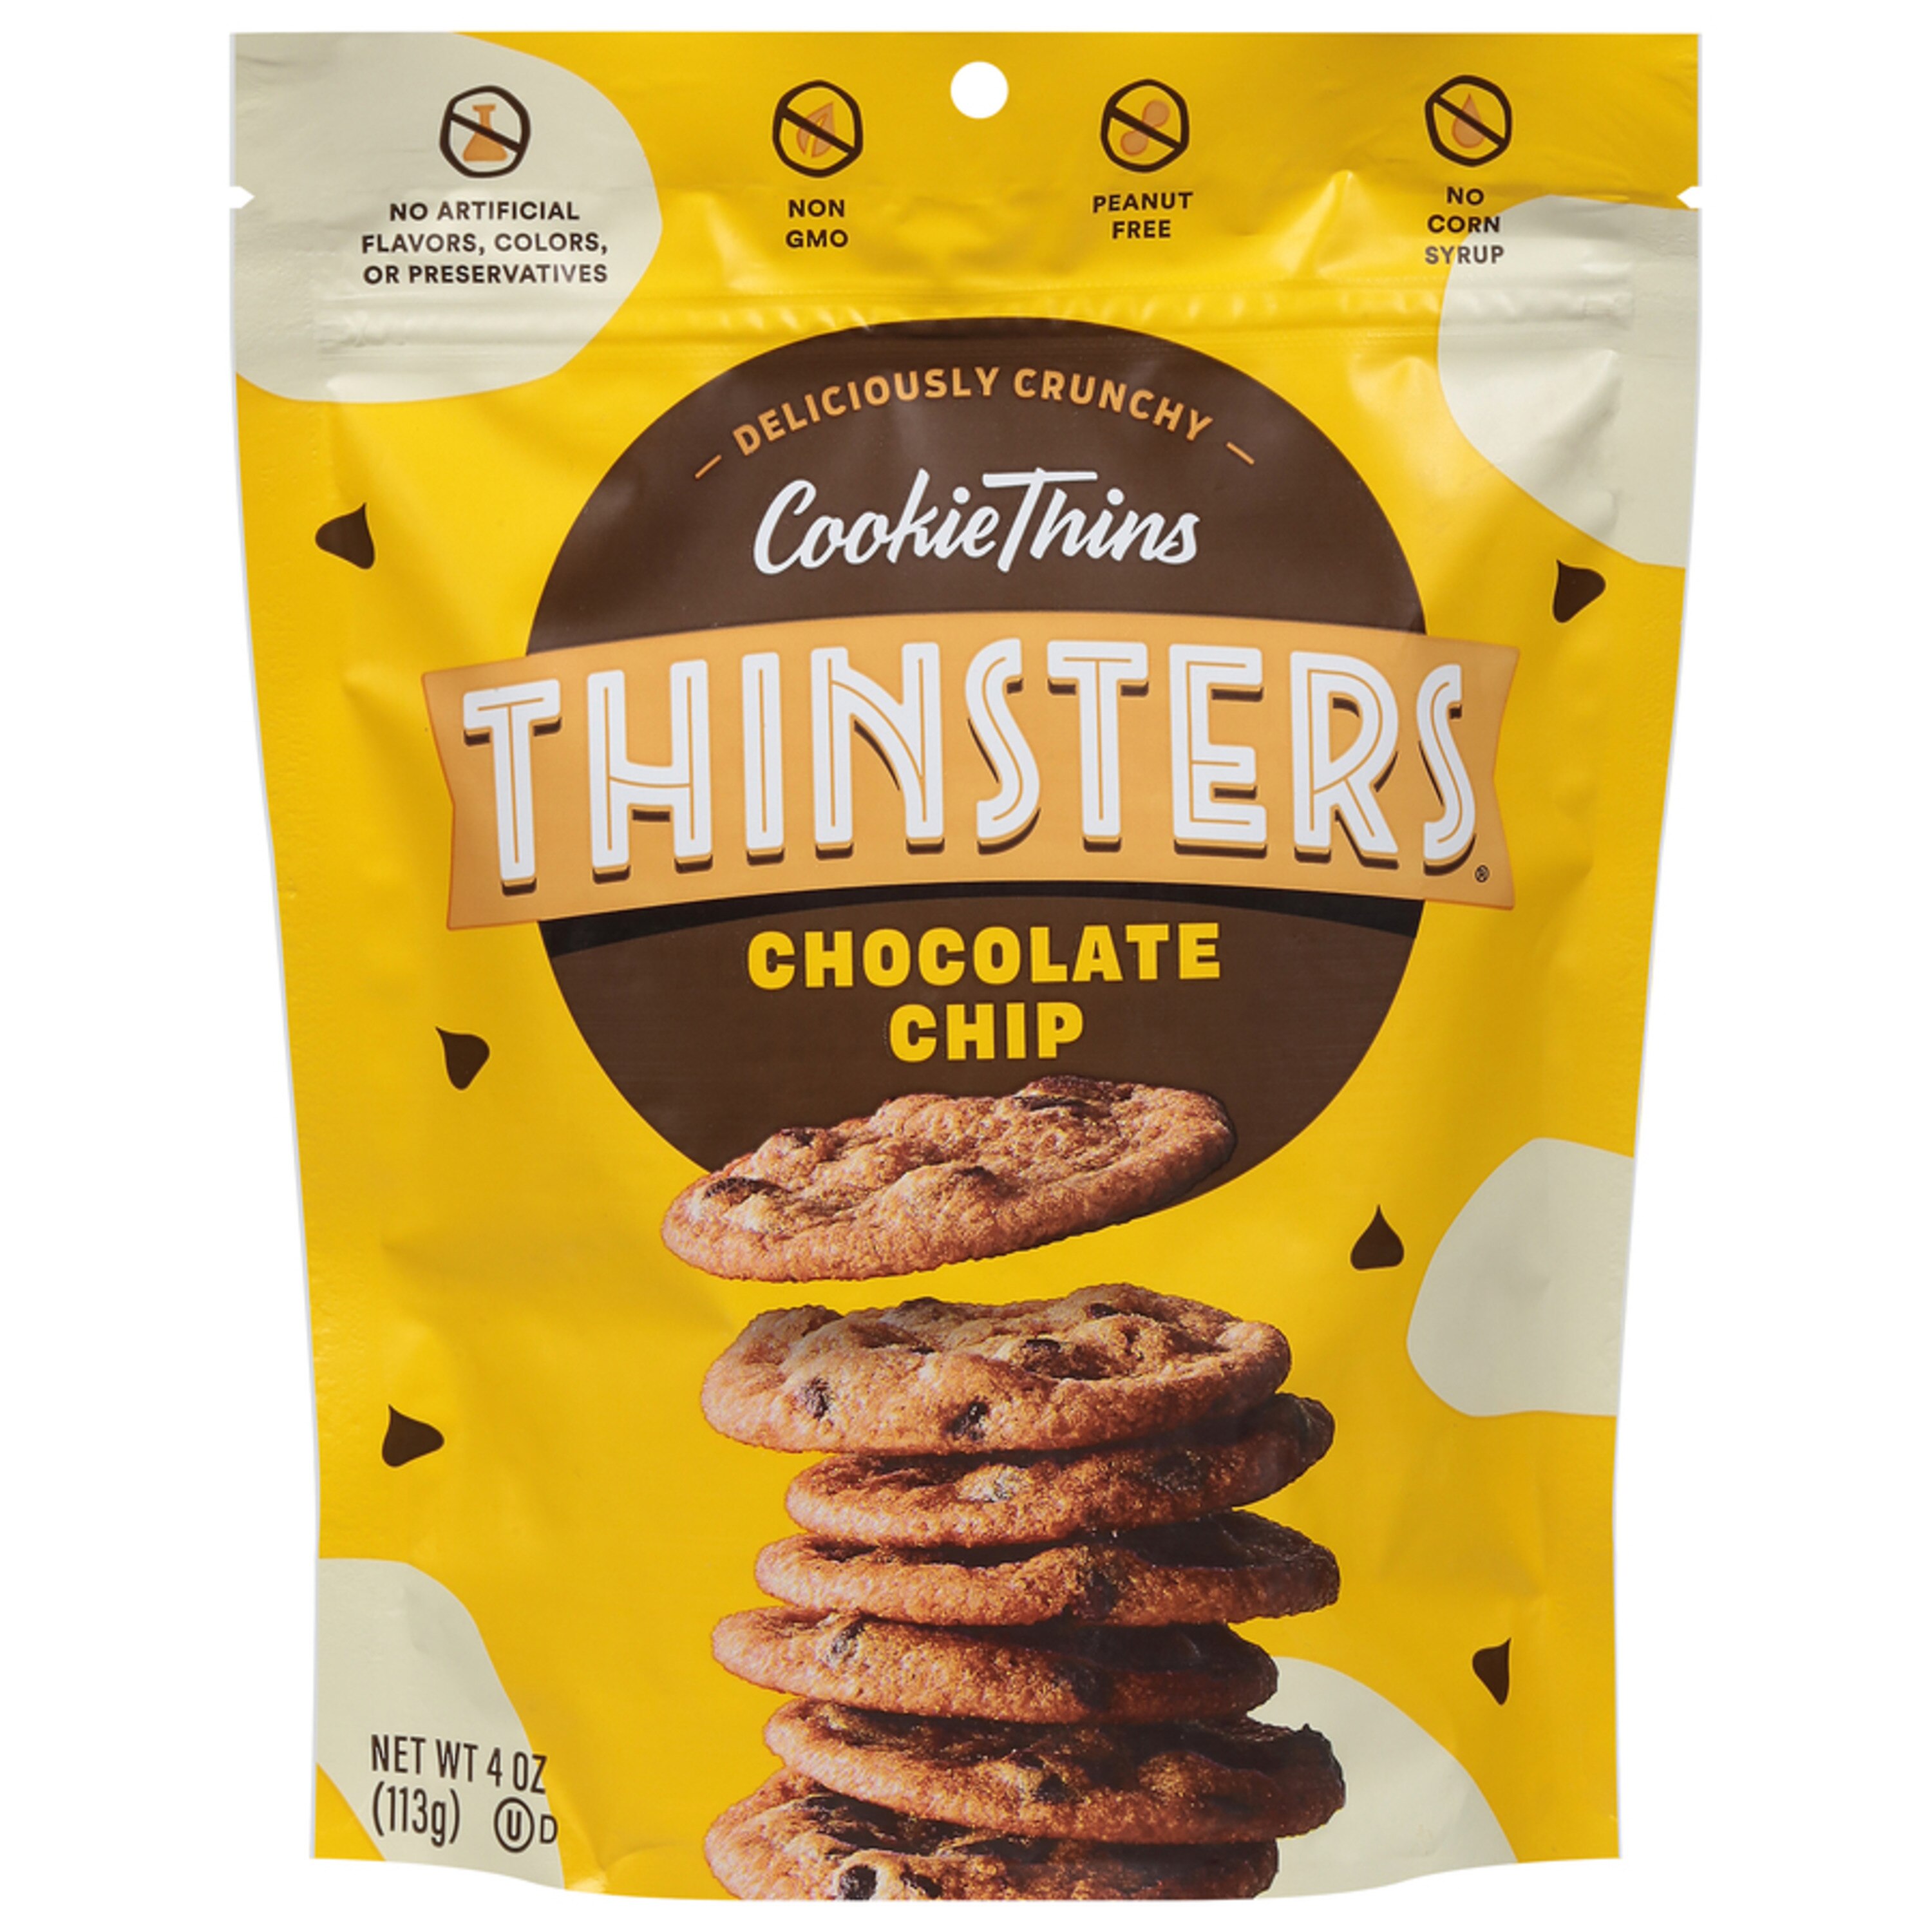 Thinsters, Chocolate Chip, Cookie Thins, 4 oz